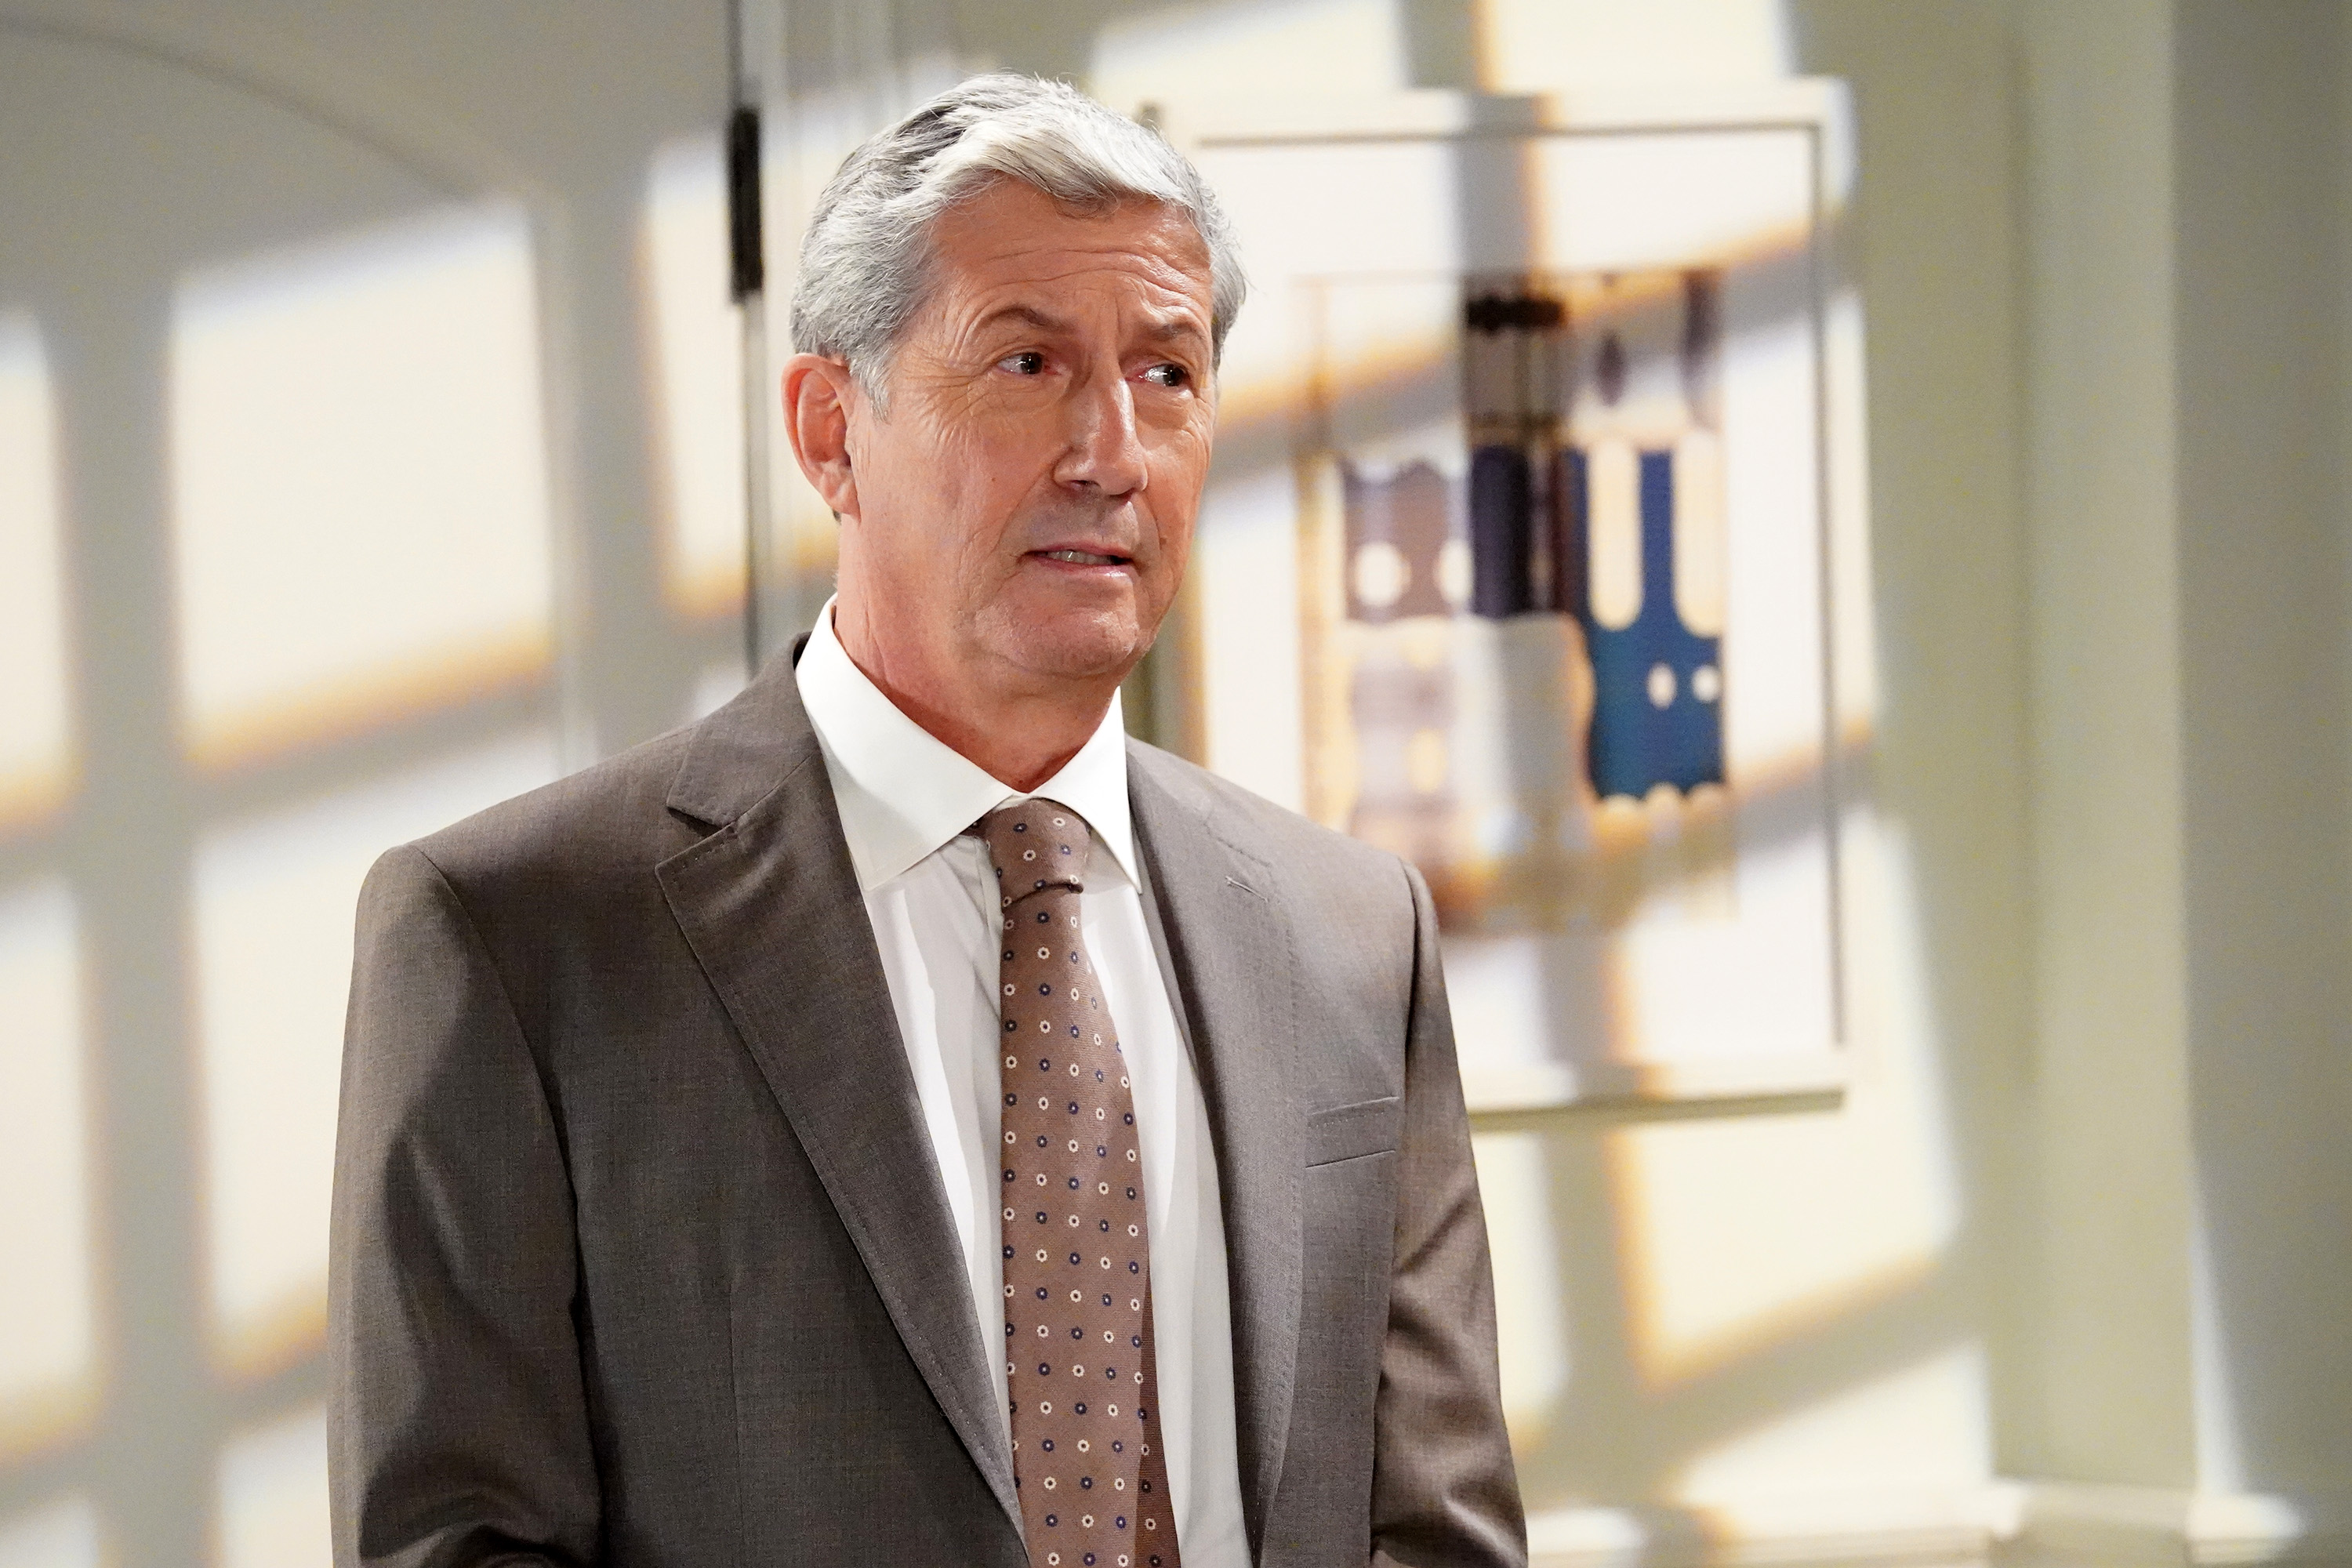 General Hospital speculation focuses on Victor Cassadine, pictured here in a grey and white suit